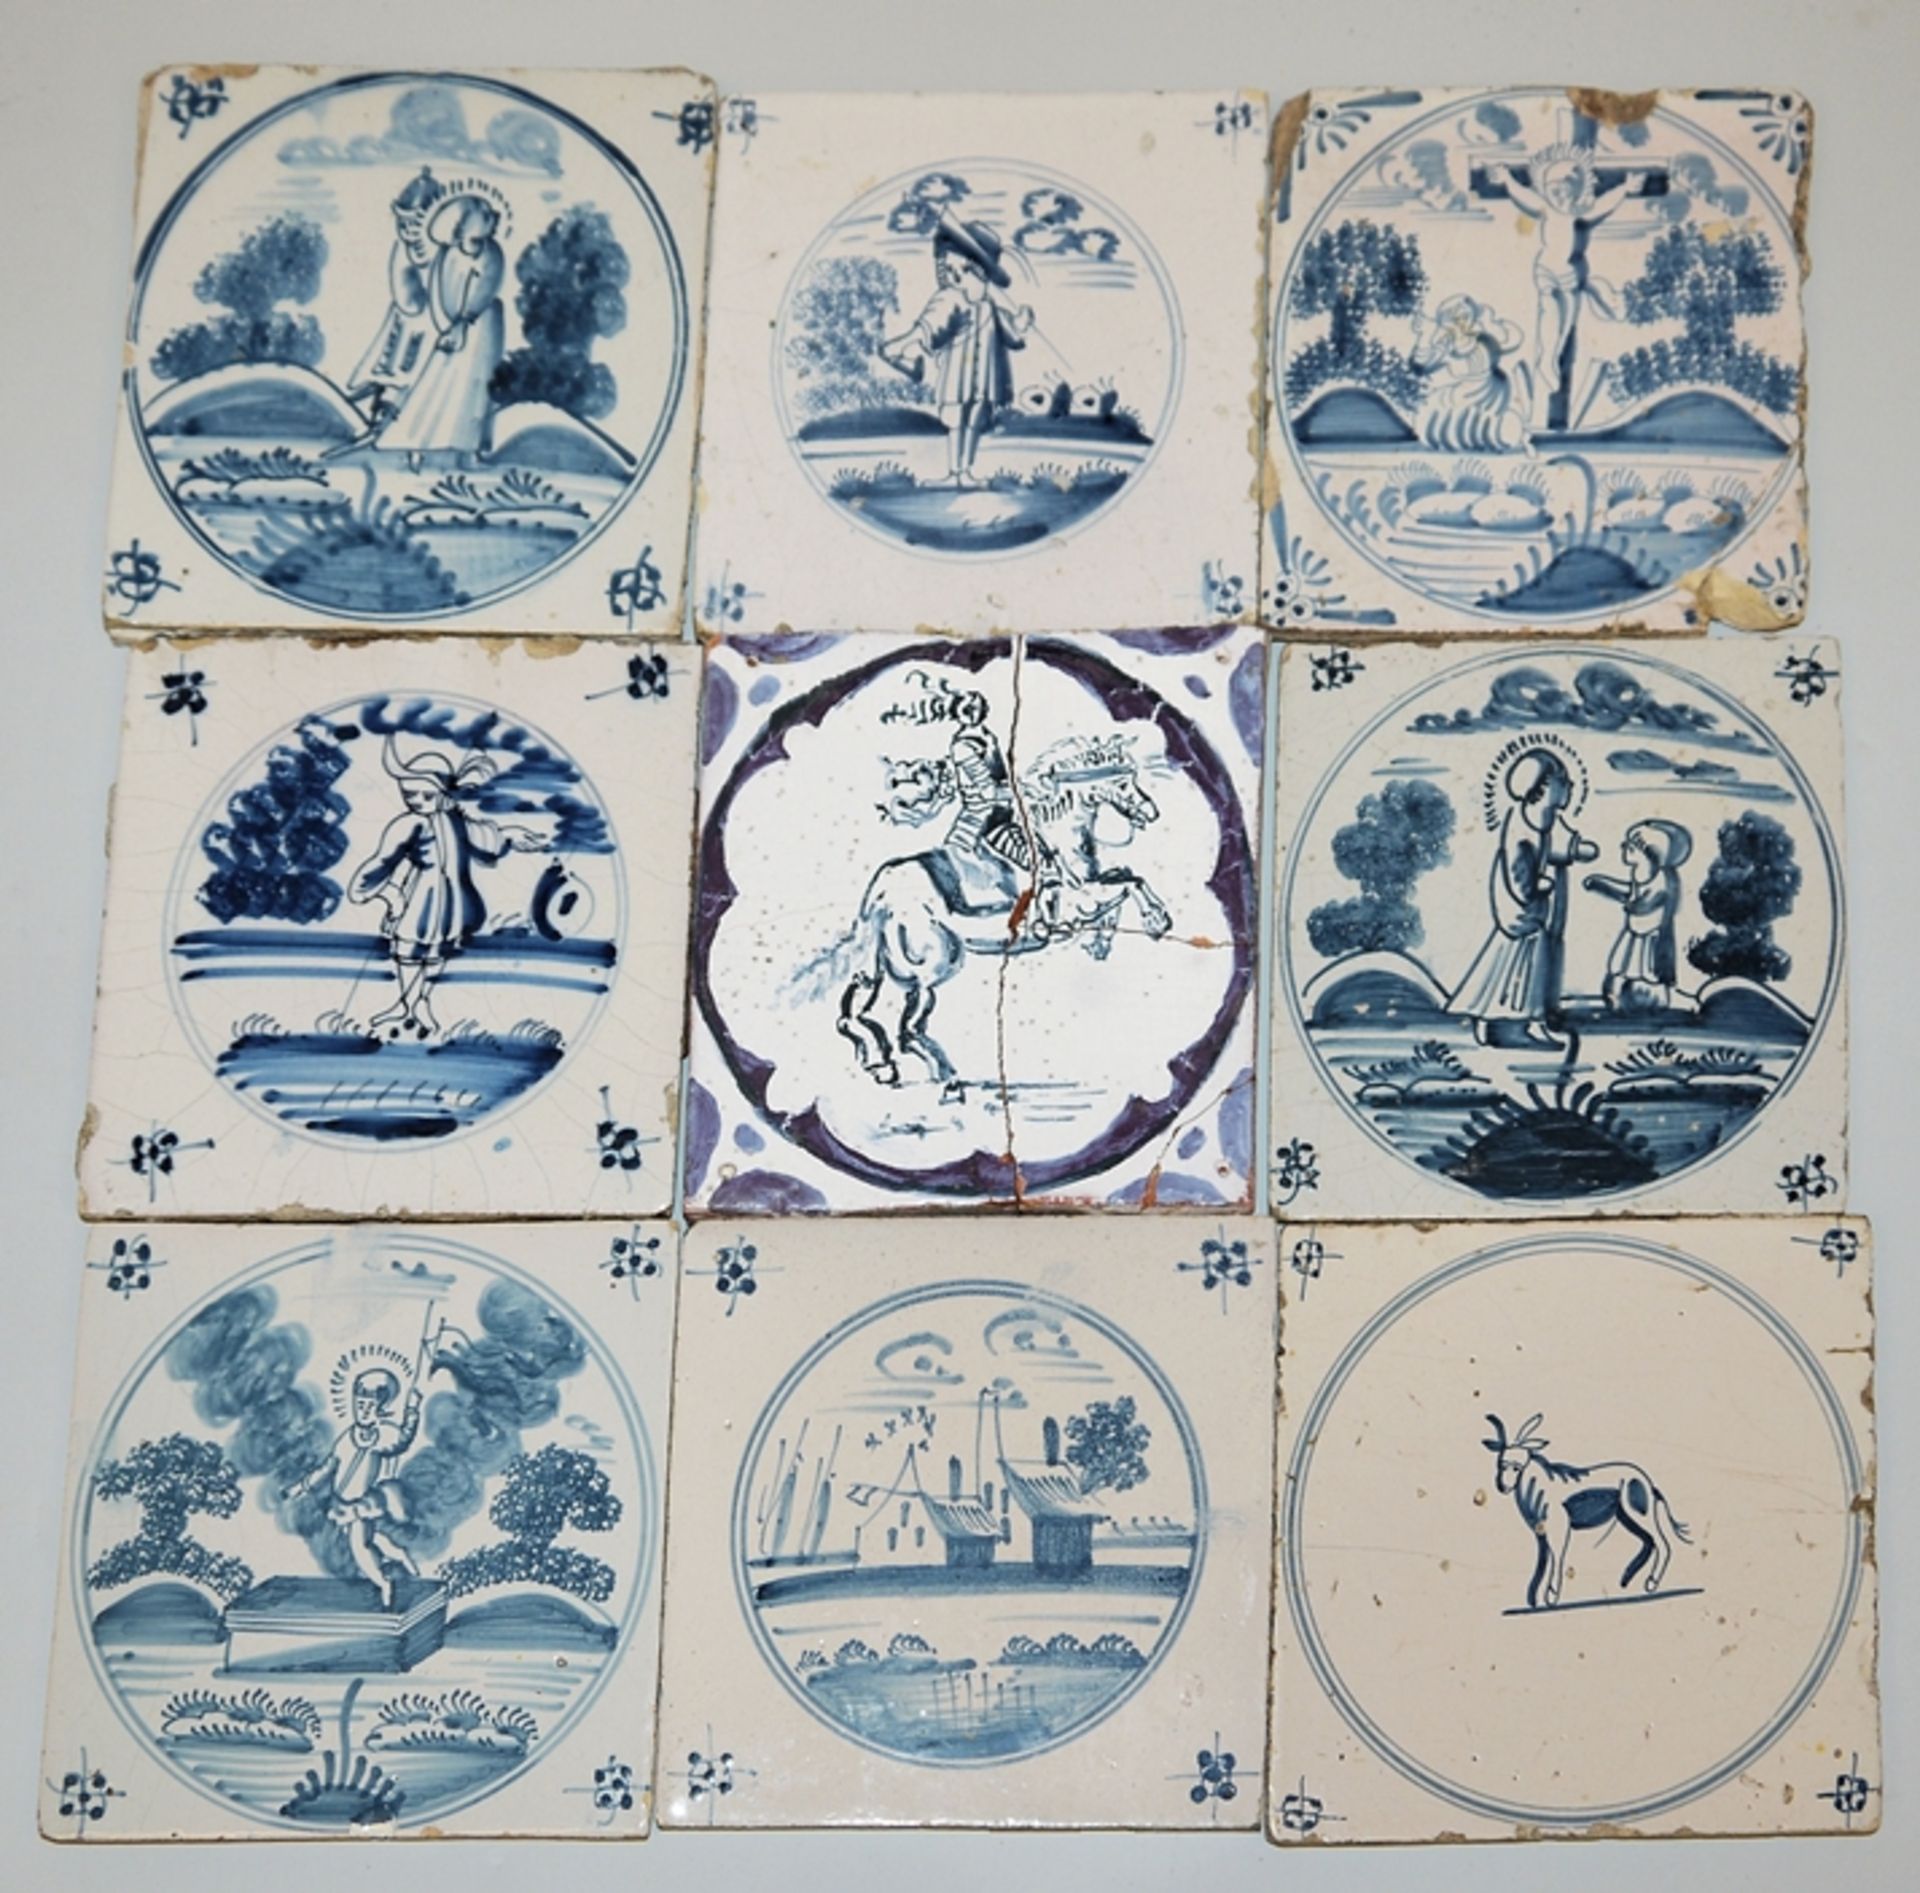 Large collection of Delft tiles from the 17th century onwards - Image 2 of 3